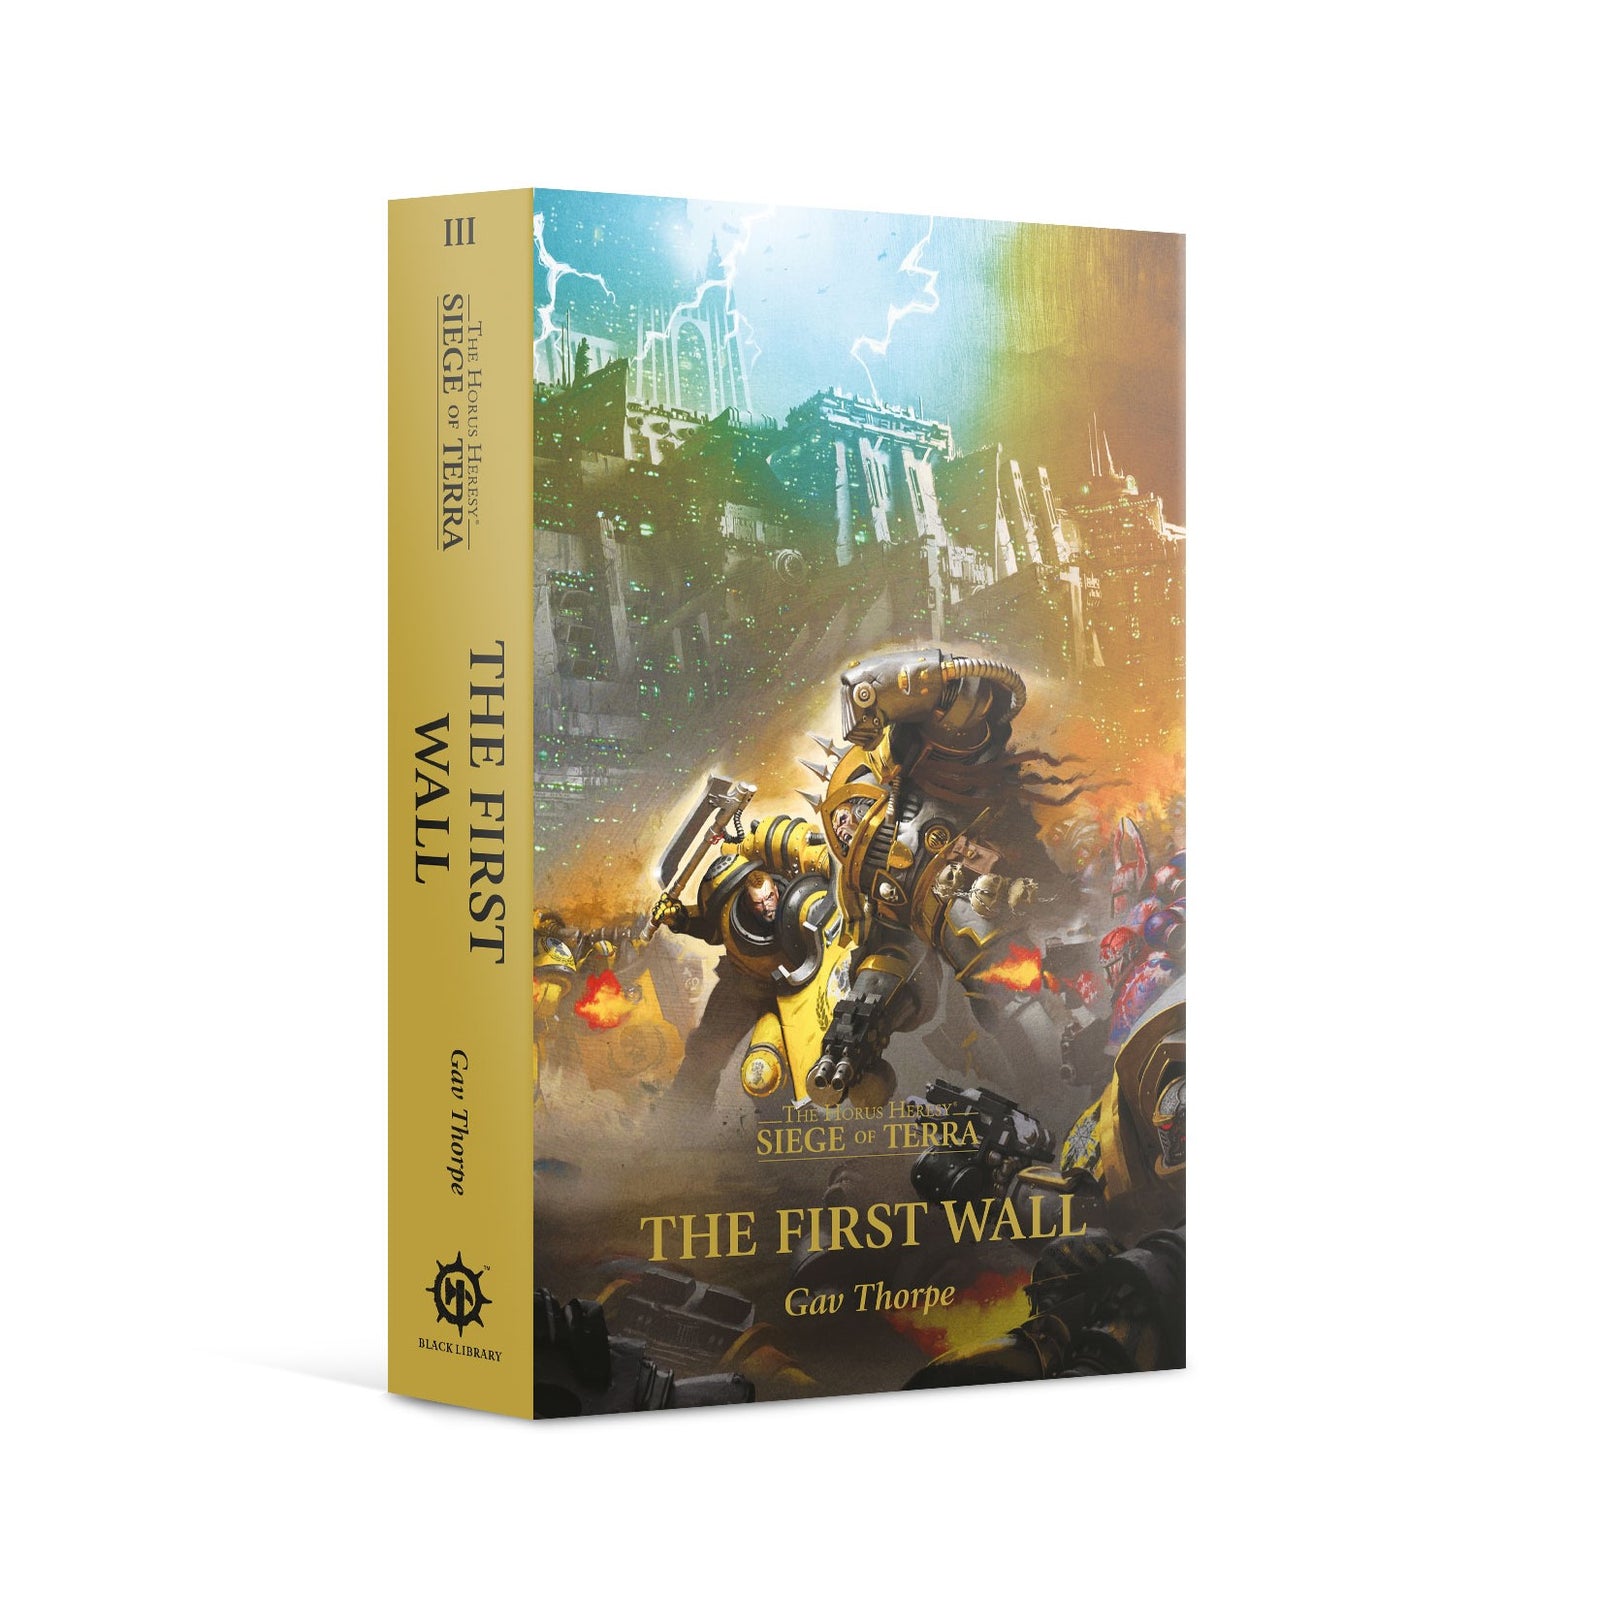 The Horus Heresy, Siege of Terra The First Wall by Gav Thorpe